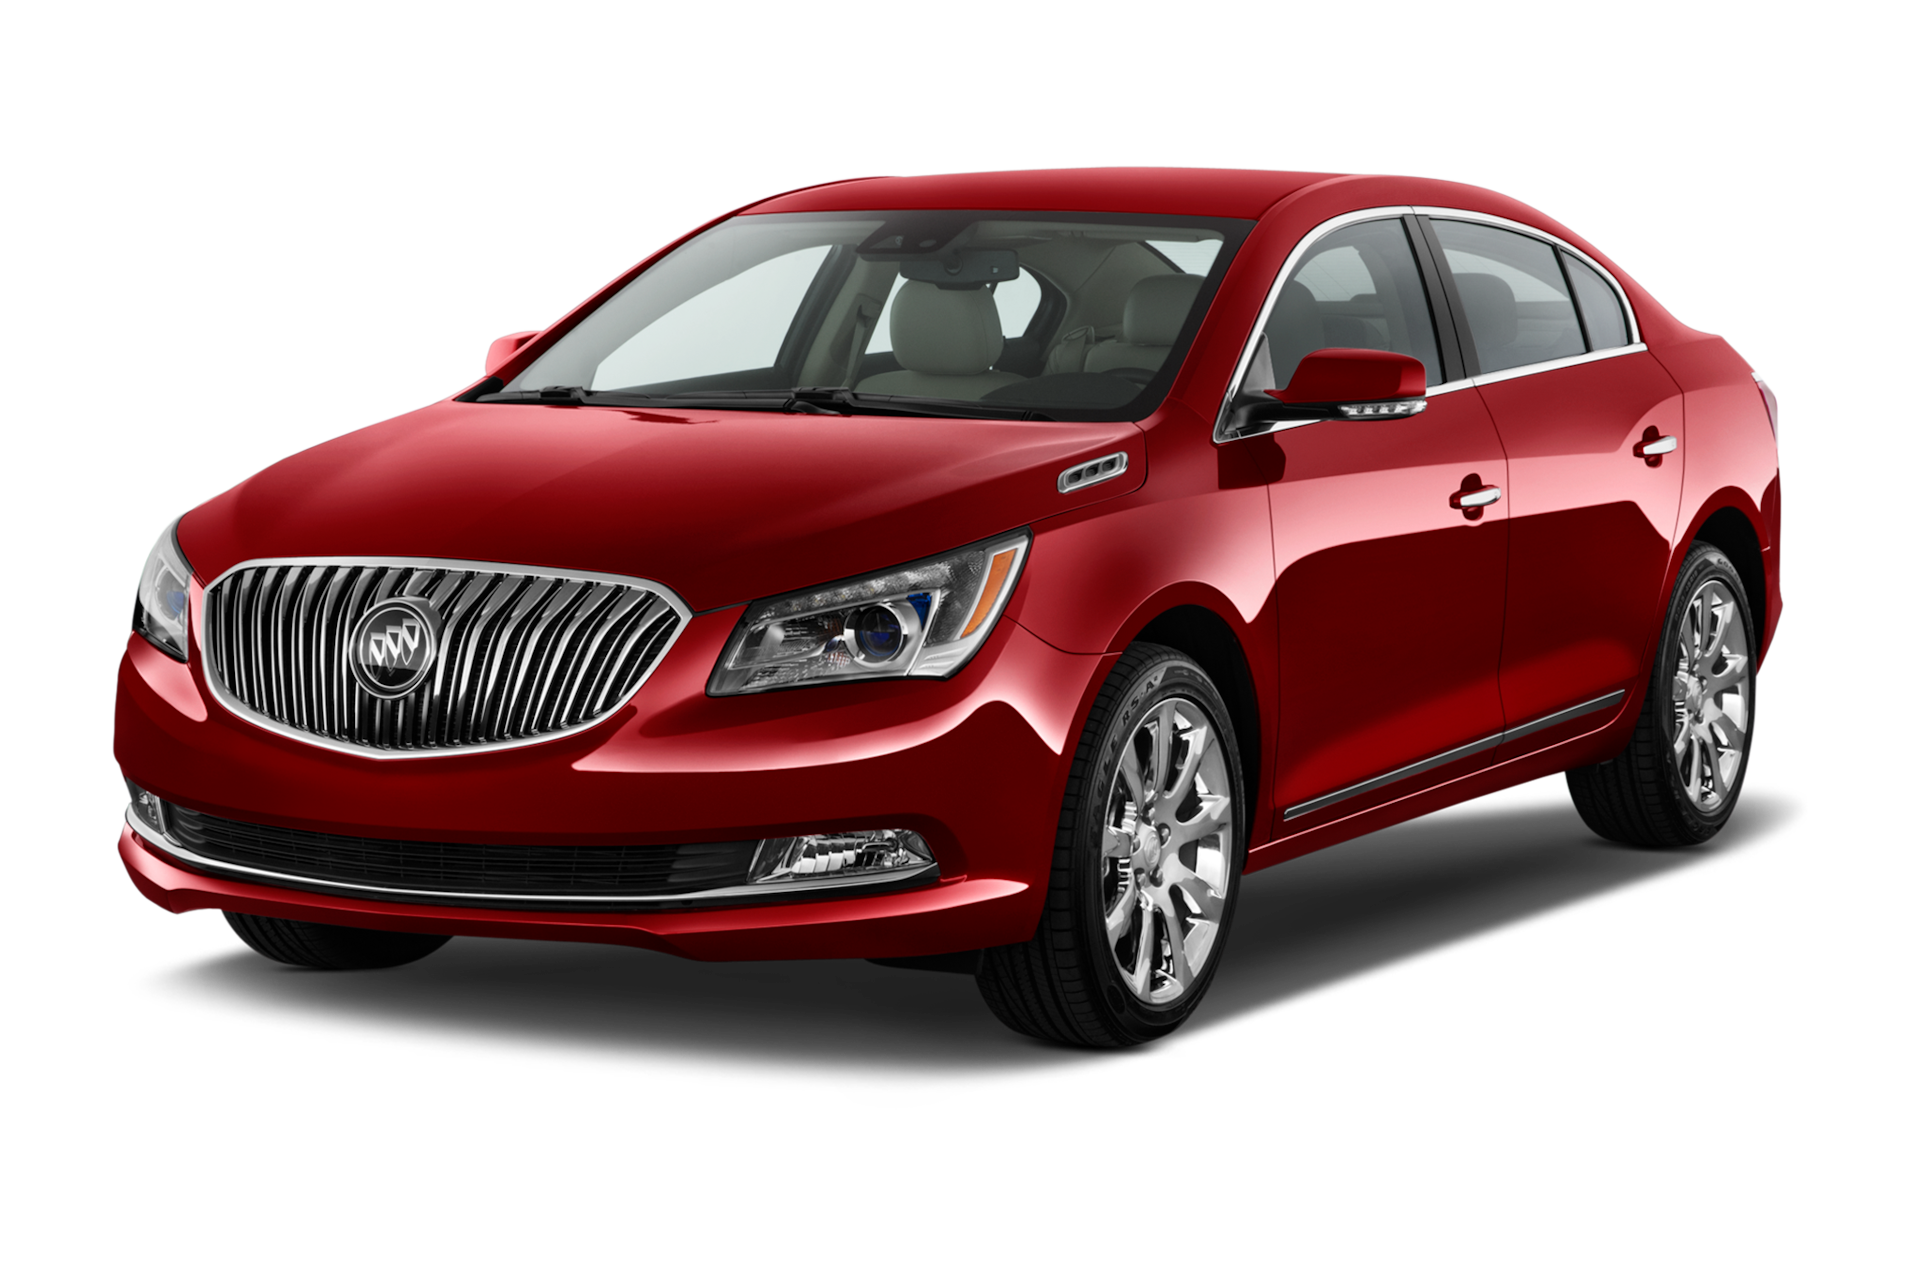 2015 Buick LaCrosse Prices, Reviews, and Photos - MotorTrend